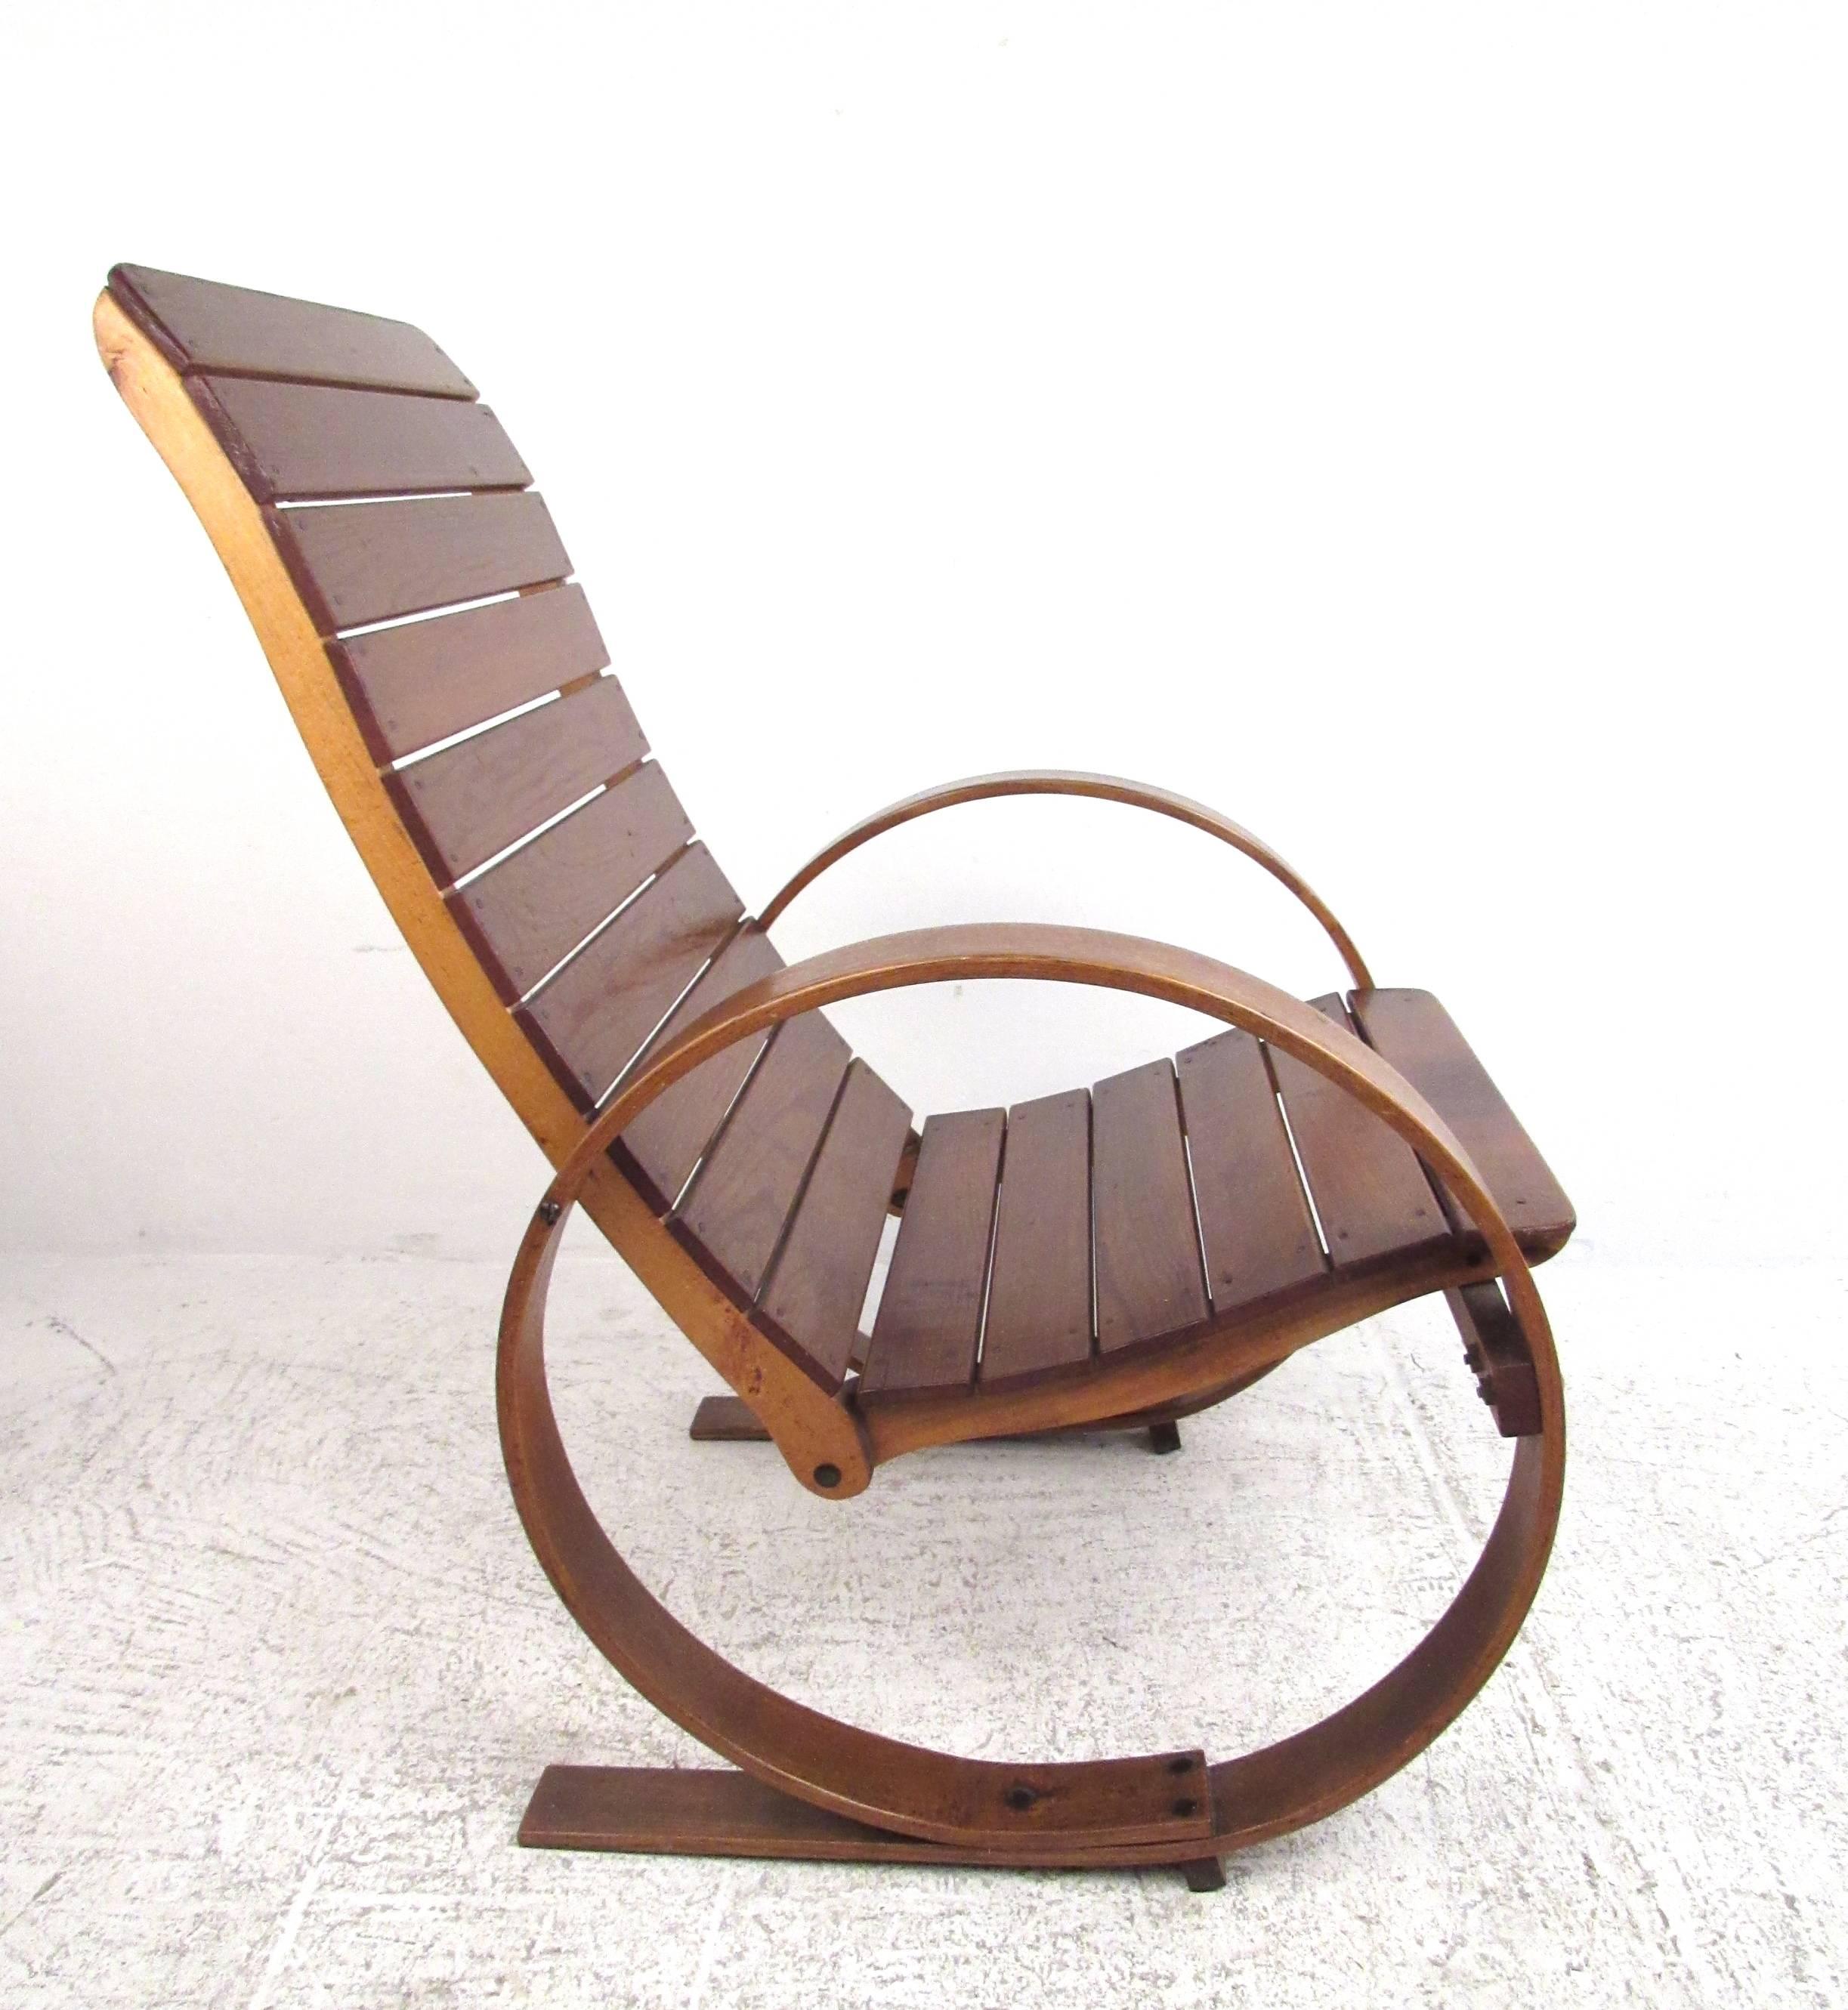 This unique vintage rocking chair features carefully crafted bentwood frame, with spring style circular rockers that double as armrests. Hardwood slat seat adds to the rustic vintage charm of this visually impressive rocker. Please confirm item